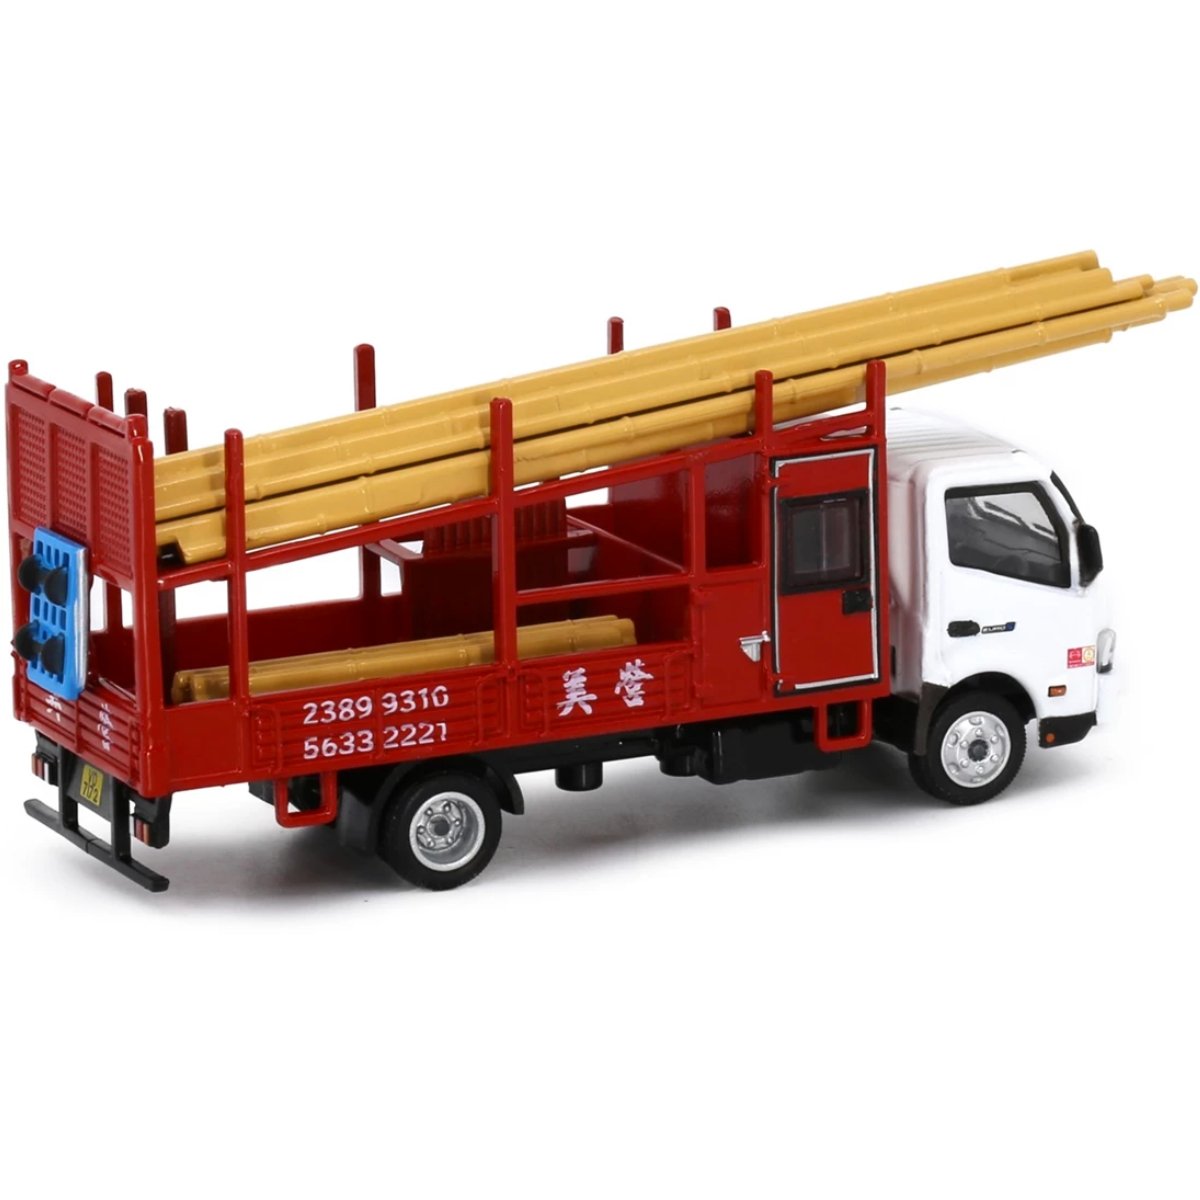 Tiny Models Hino 300 Bamboo Scaffolding Lorry (1:76 Scale) - Phillips Hobbies